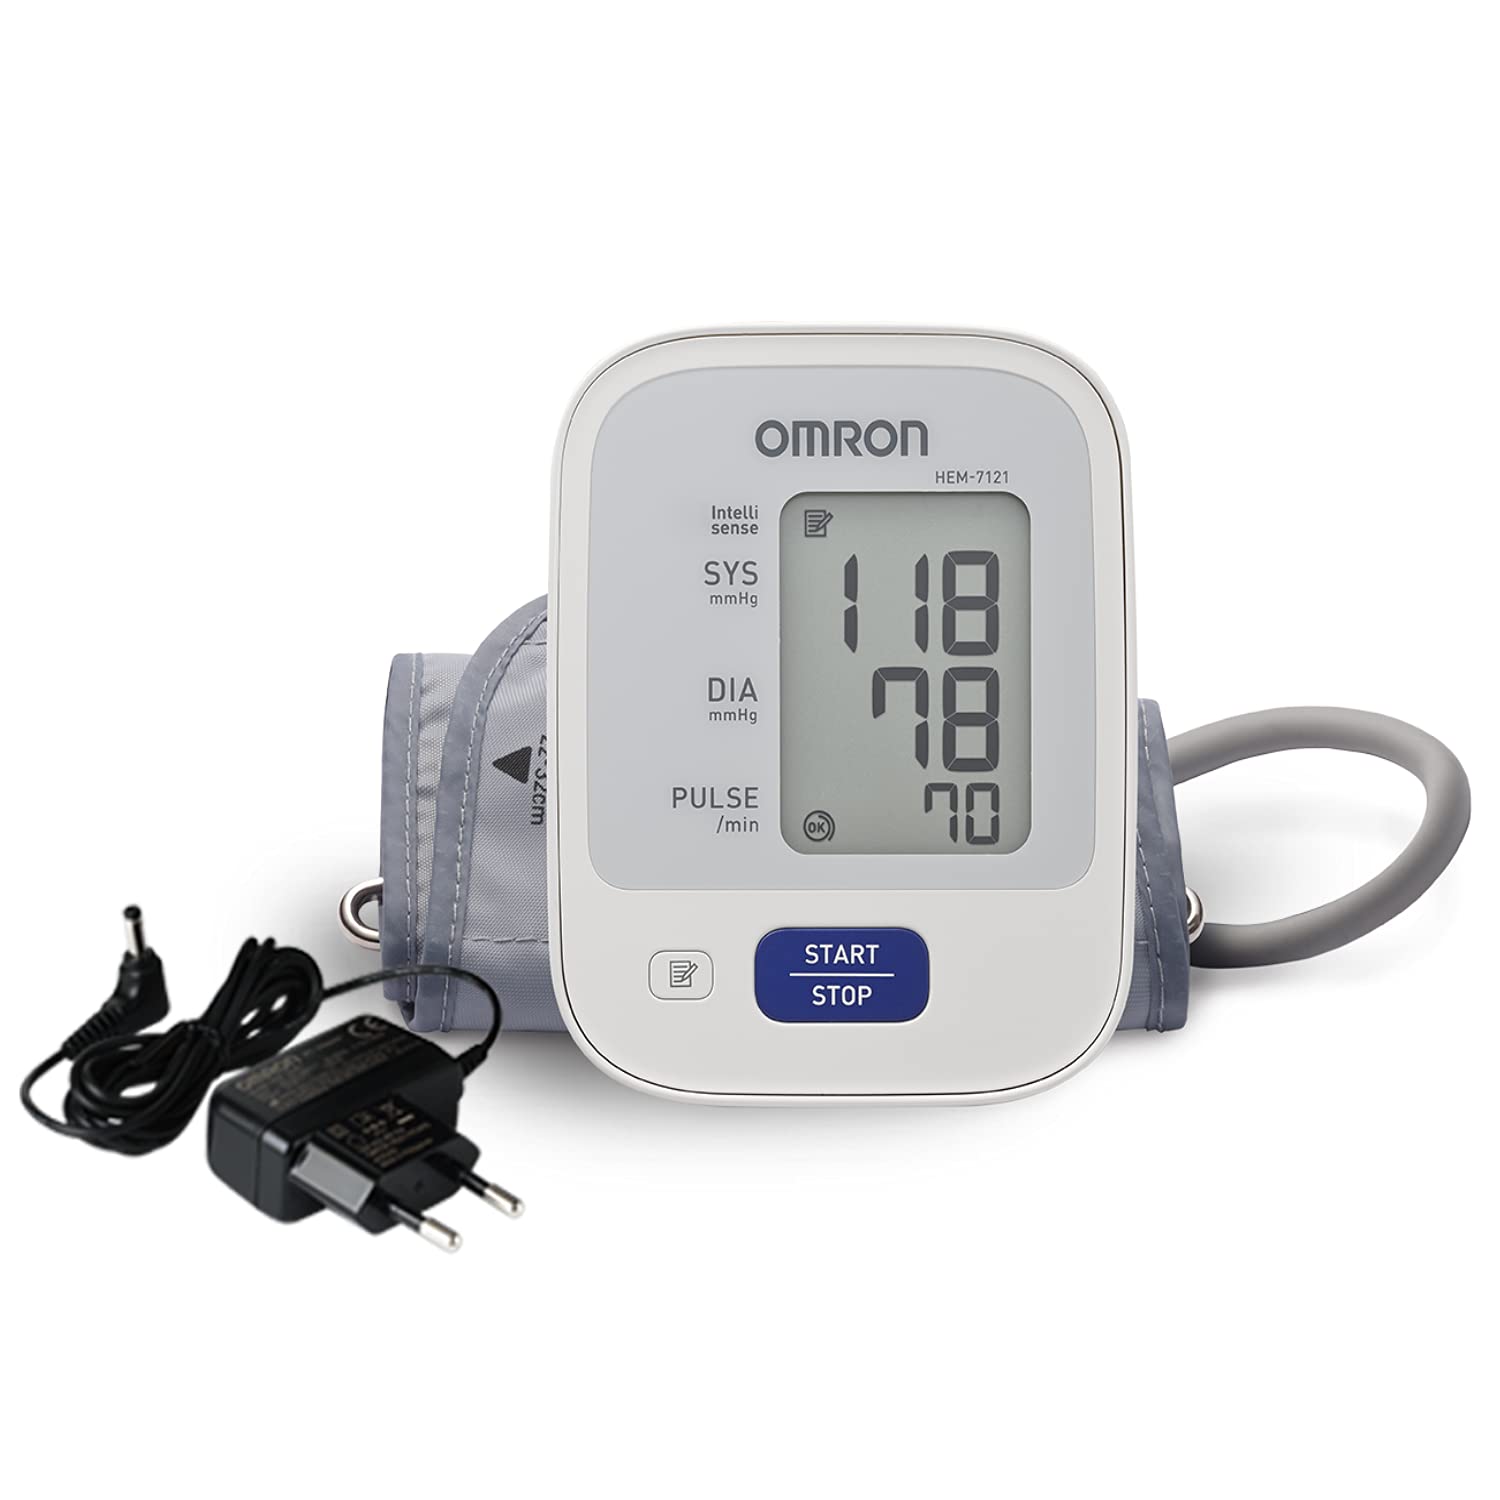 Omron HEM 7143T1 Digital Bluetooth Blood Pressure Monitor with Cuff  Wrapping Guide & Intellisense Technology For Most Accurate Measurement